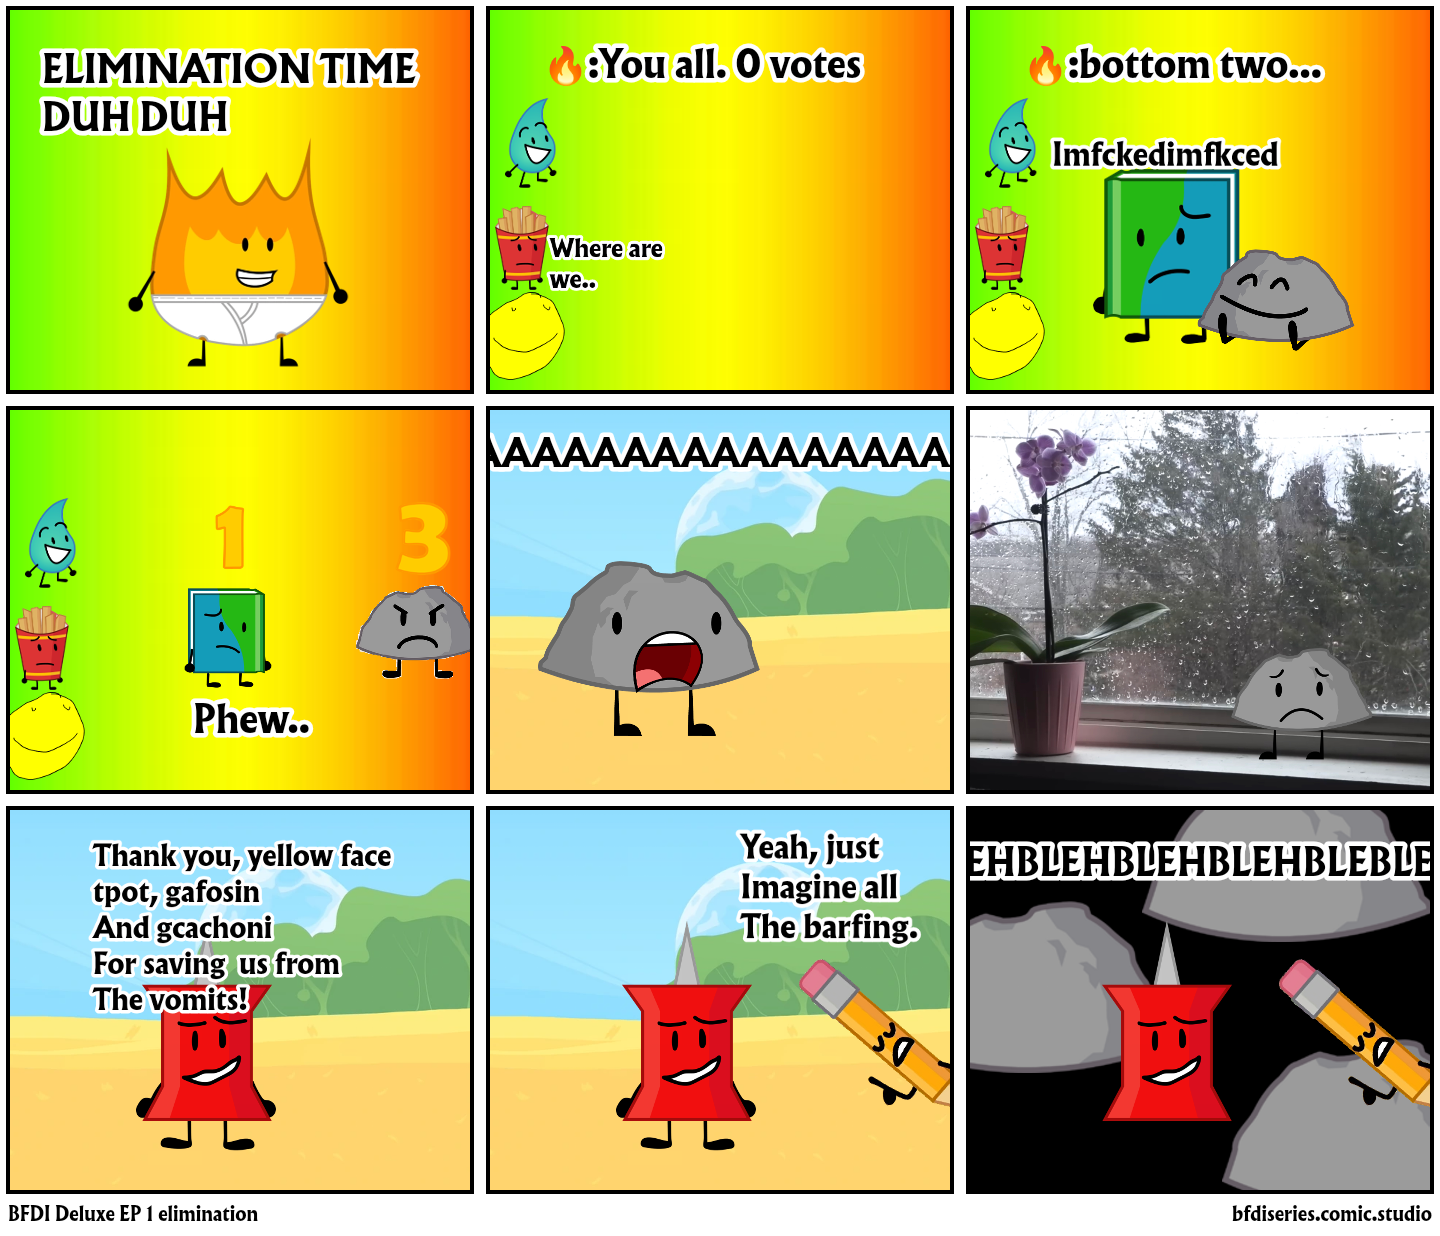 BFDI Deluxe EP 1 elimination